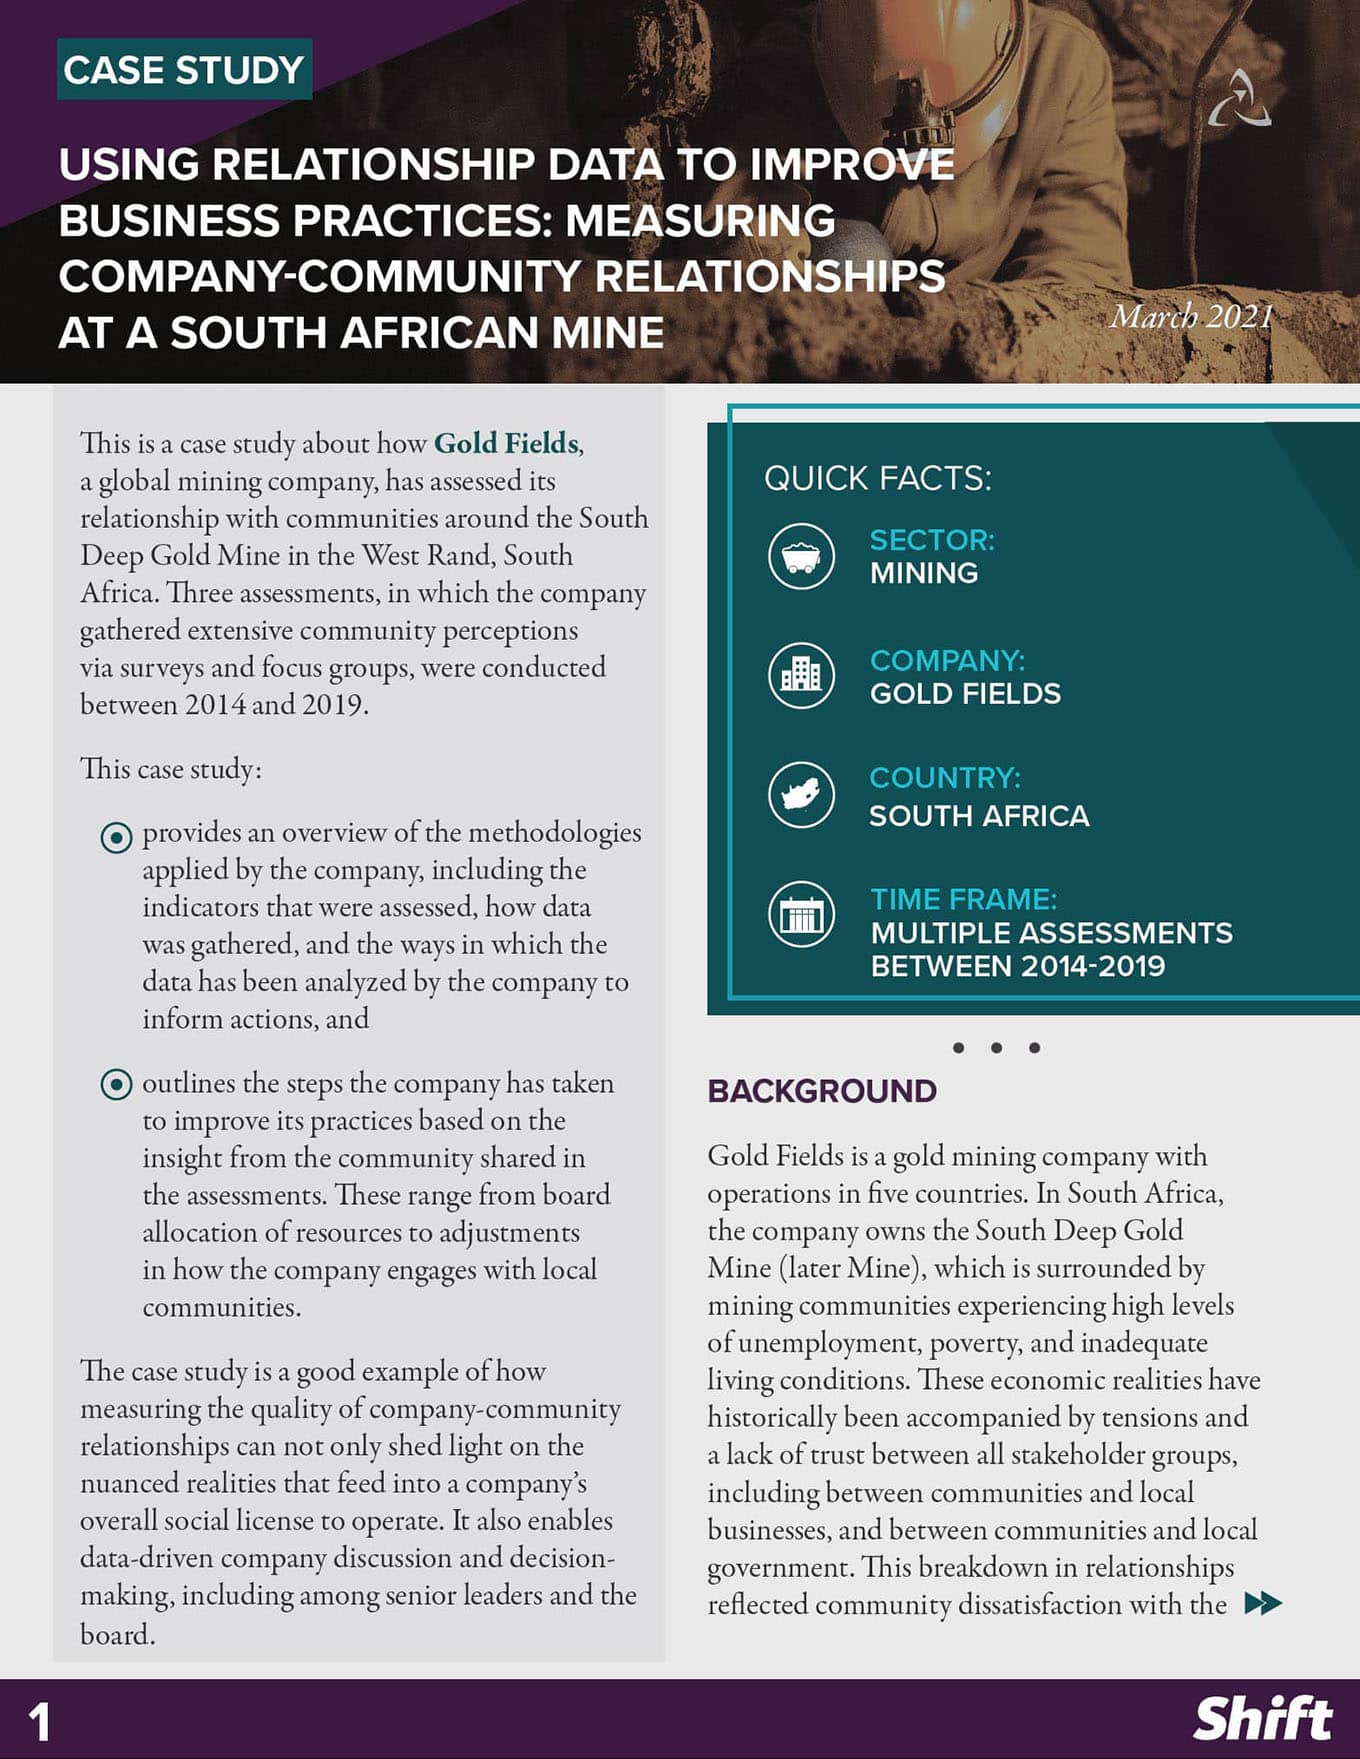 Using Relationship Data to Improve Business Practices: Measuring Company-Community Relationships at a South African Mine (Shift, 2021)